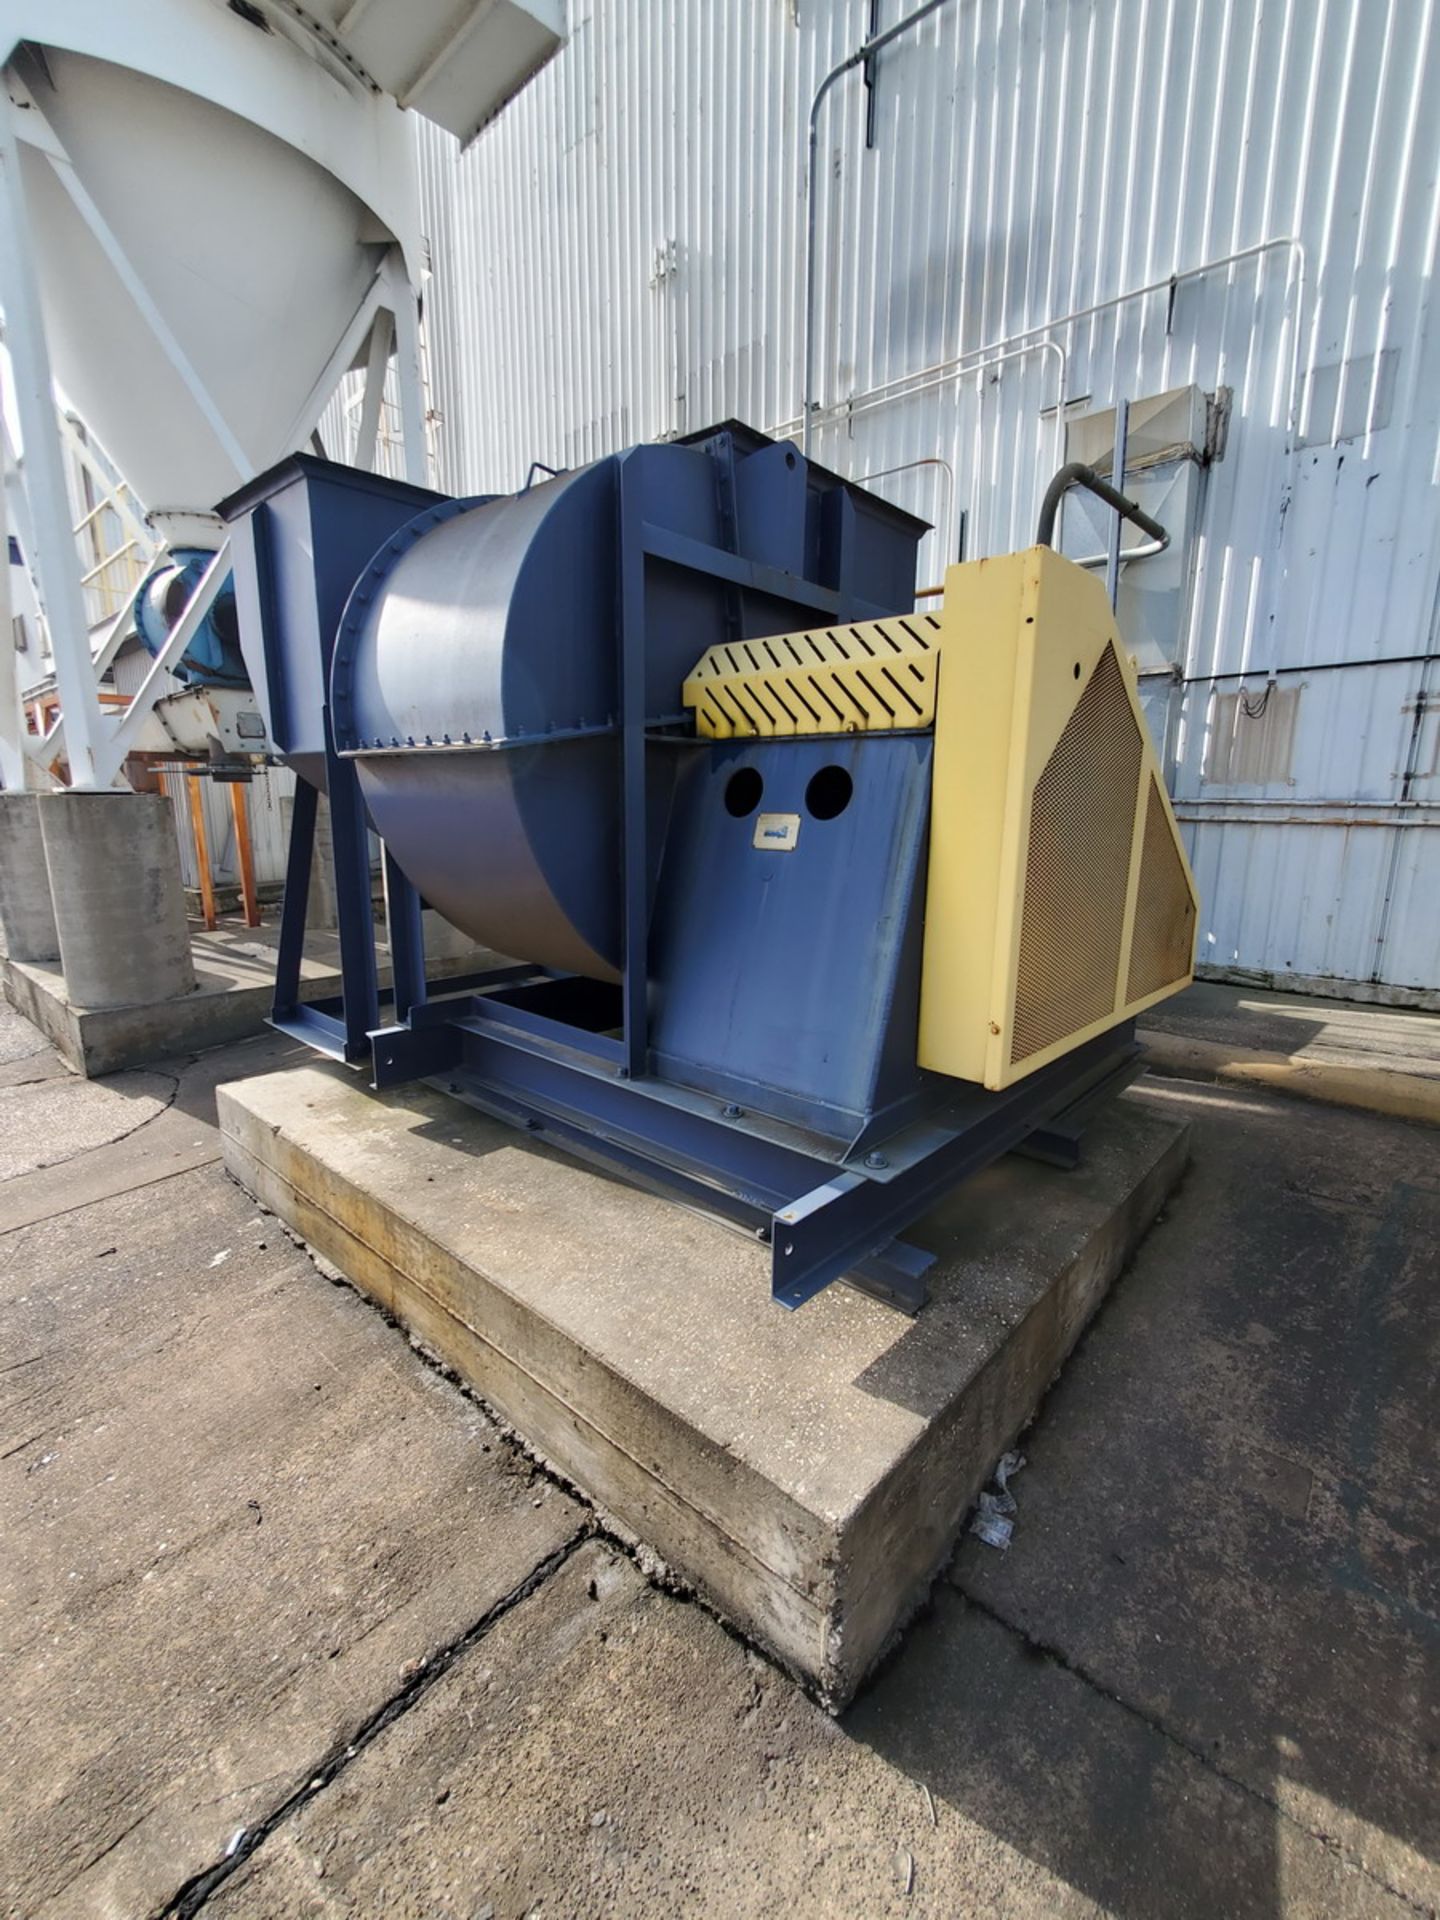 Donaldson Torit Dust Collector Mdl: RF276-10, 100HP, 230-460V, 3PH, 60HZ; W/ Tower, W/ Housing - Image 8 of 15